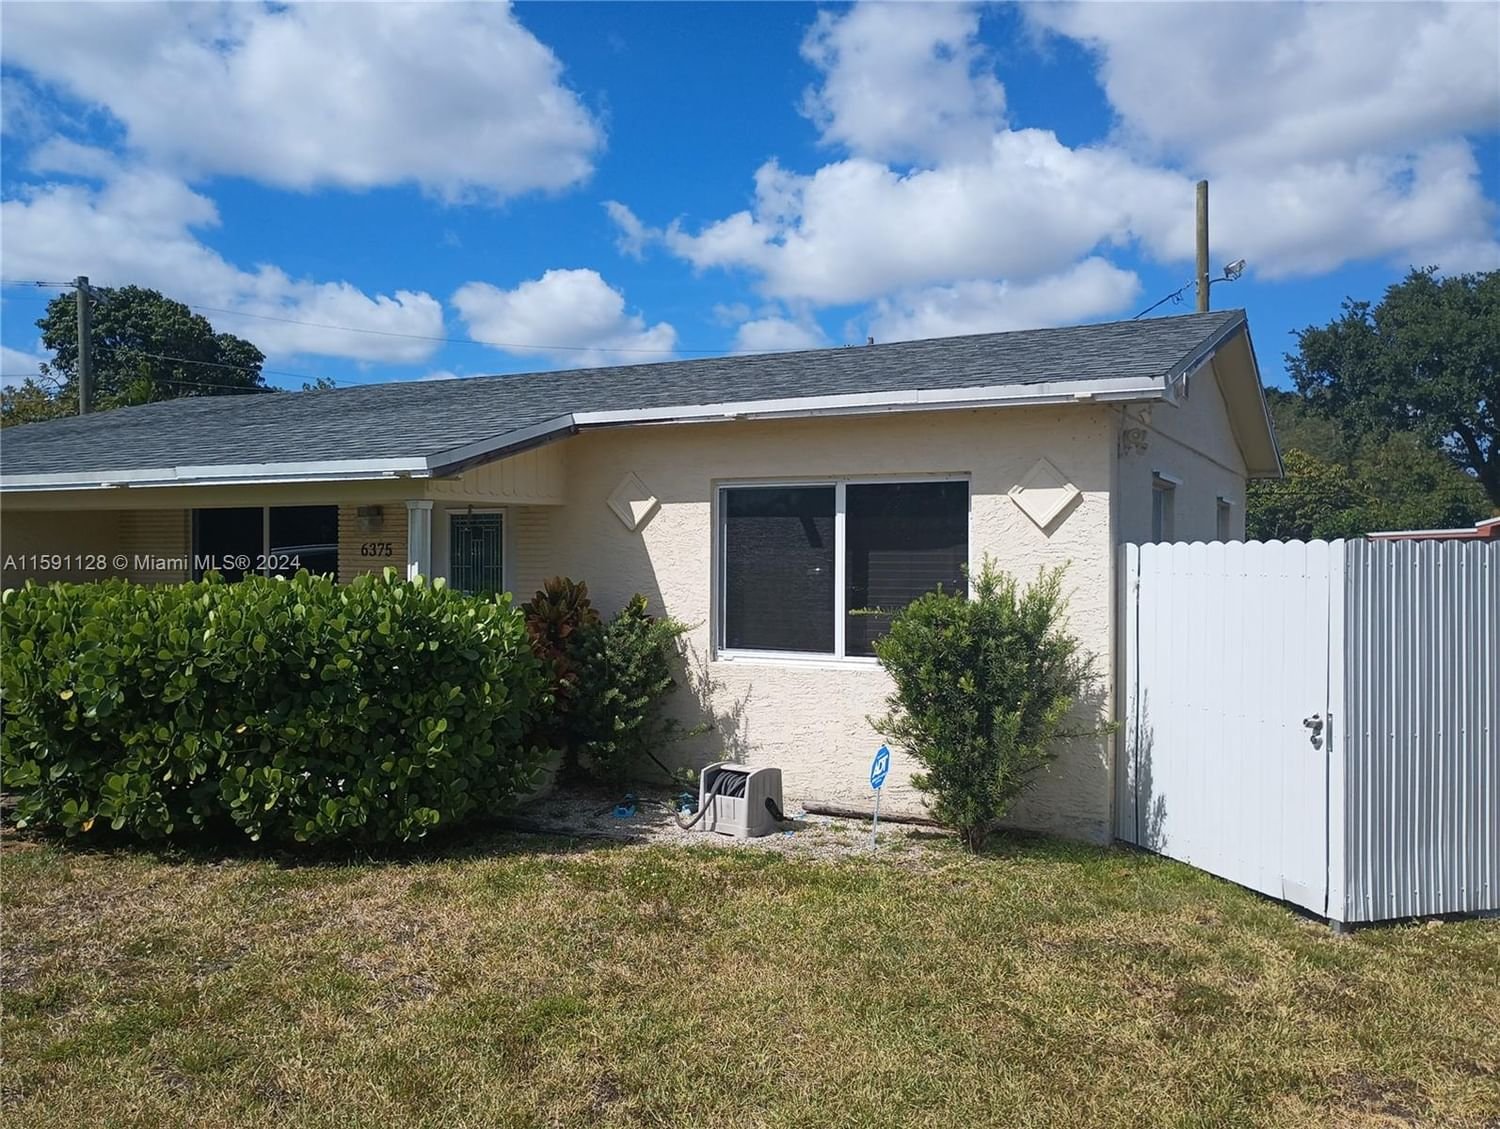 Real estate property located at 6375 Plunkett St, Broward County, BEVERLY PARK, Hollywood, FL